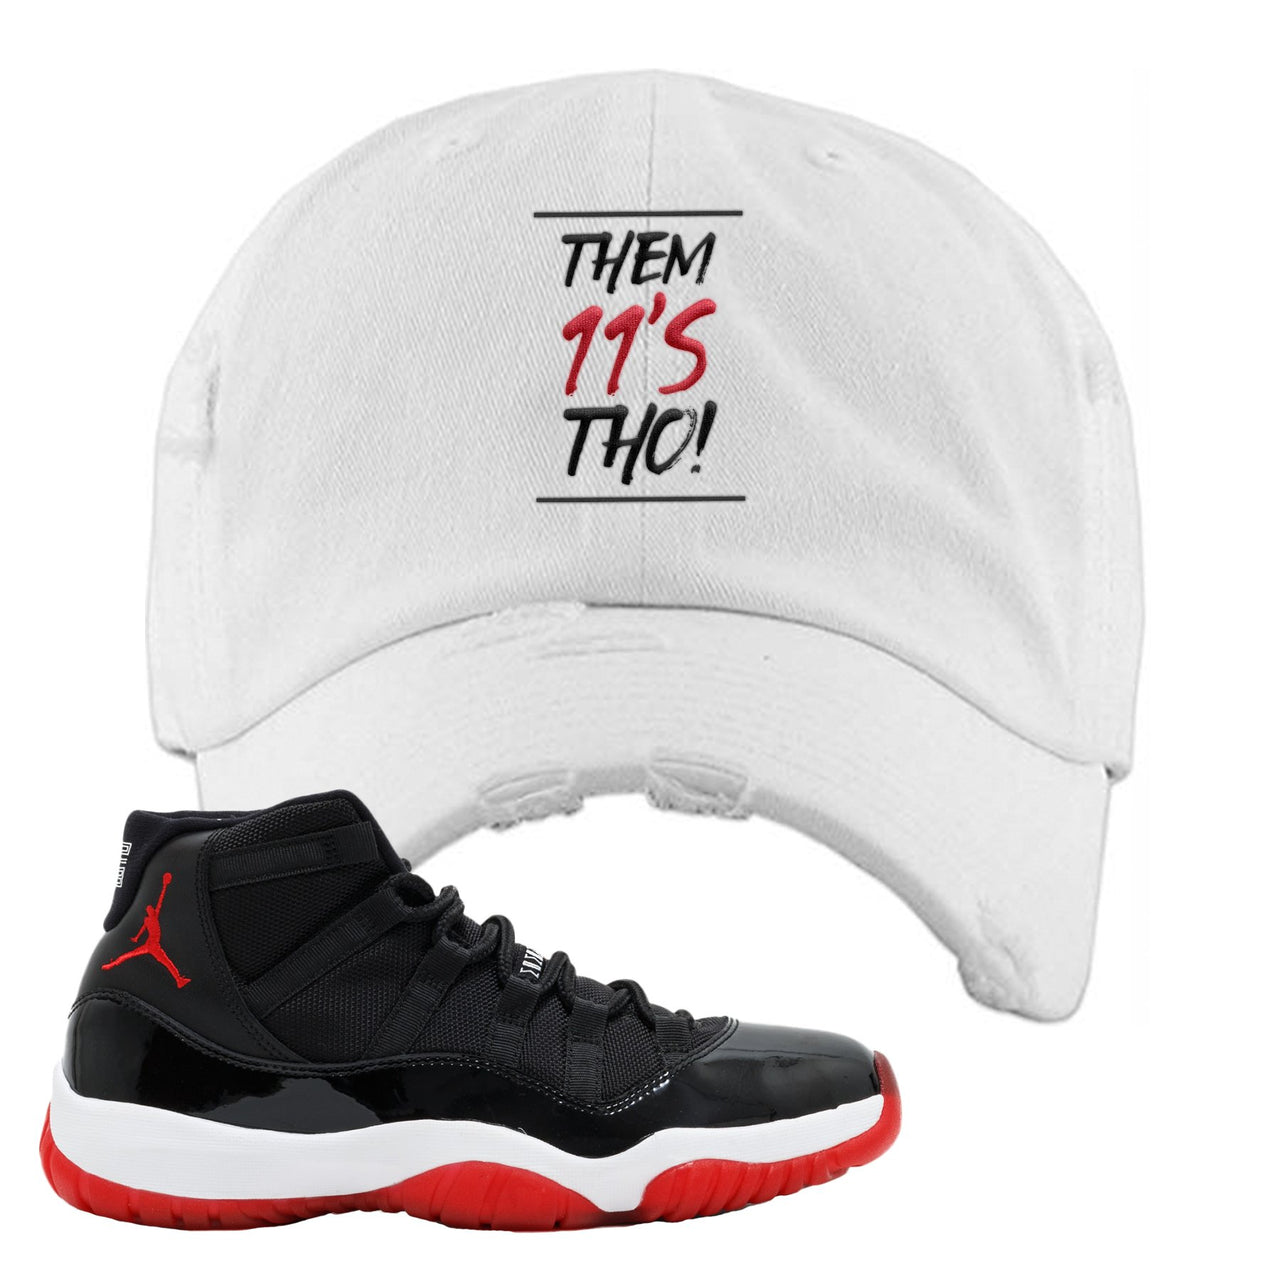 Jordan 11 Bred Them 11s Tho! White Sneaker Hook Up Distressed Dad Hat